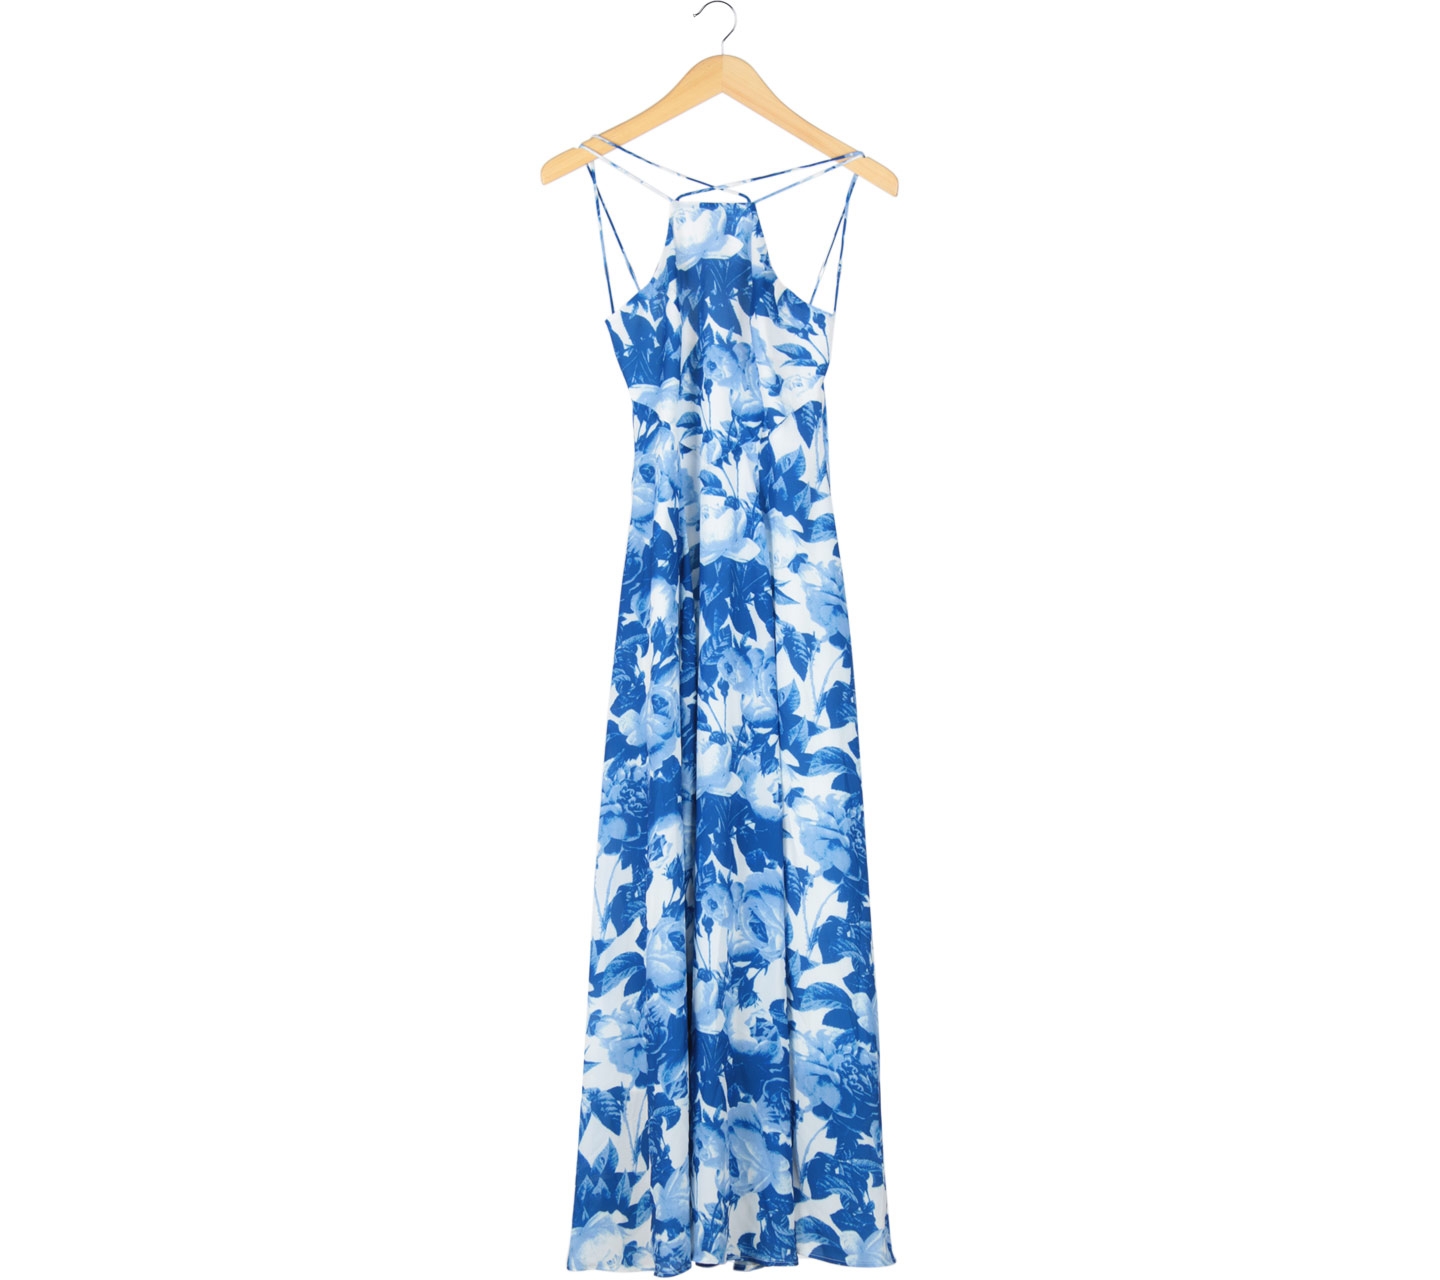 Swan by VGY Blue And White Floral Long Dress